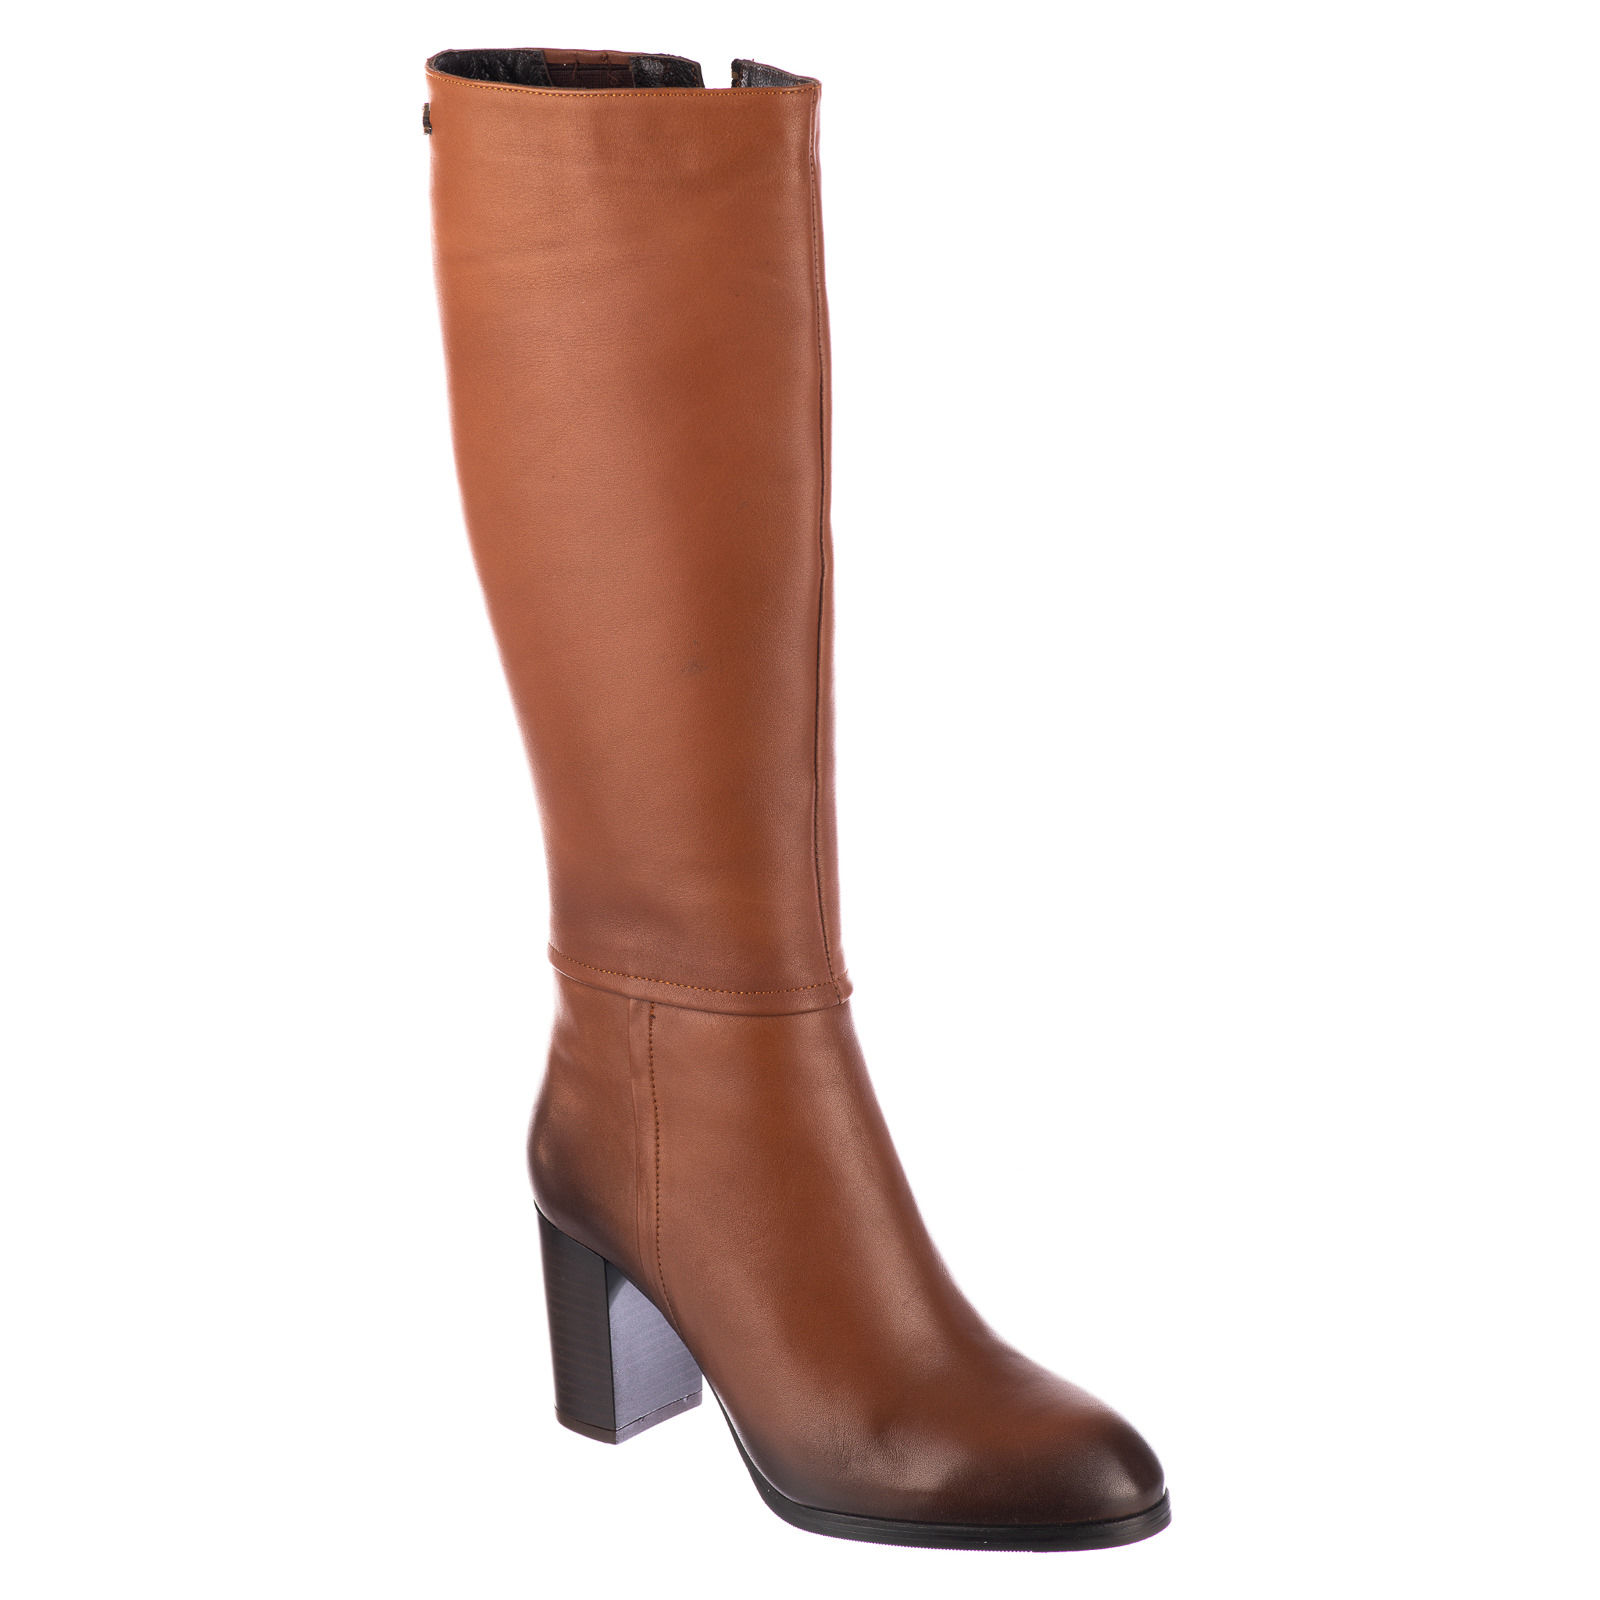 Leather boots B659 - CAMEL